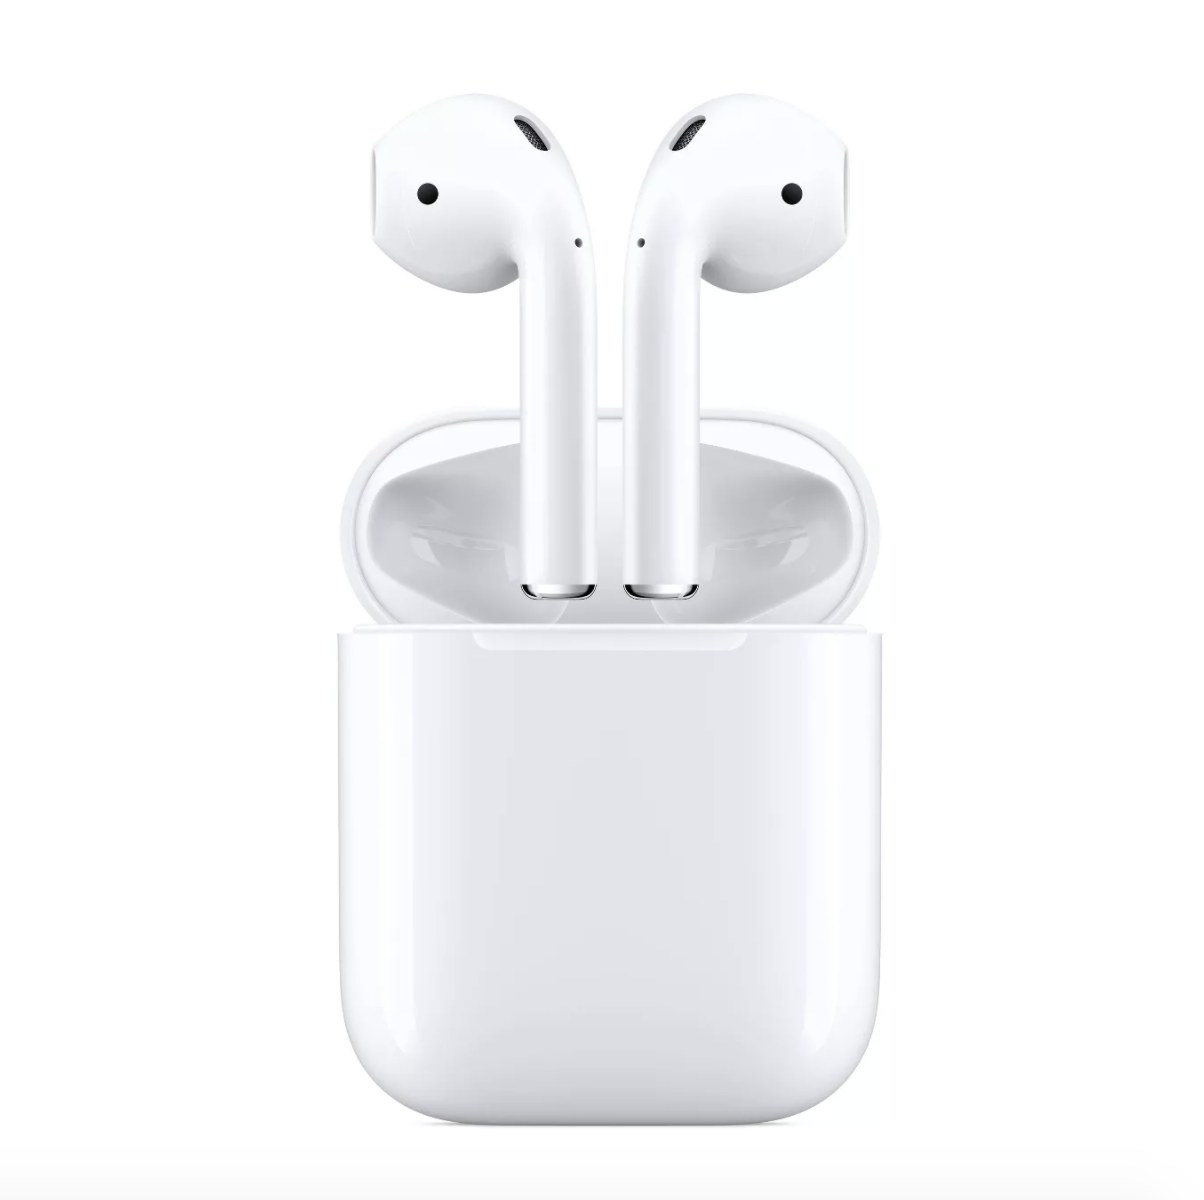 Pair of Apple Airpods with white charging case